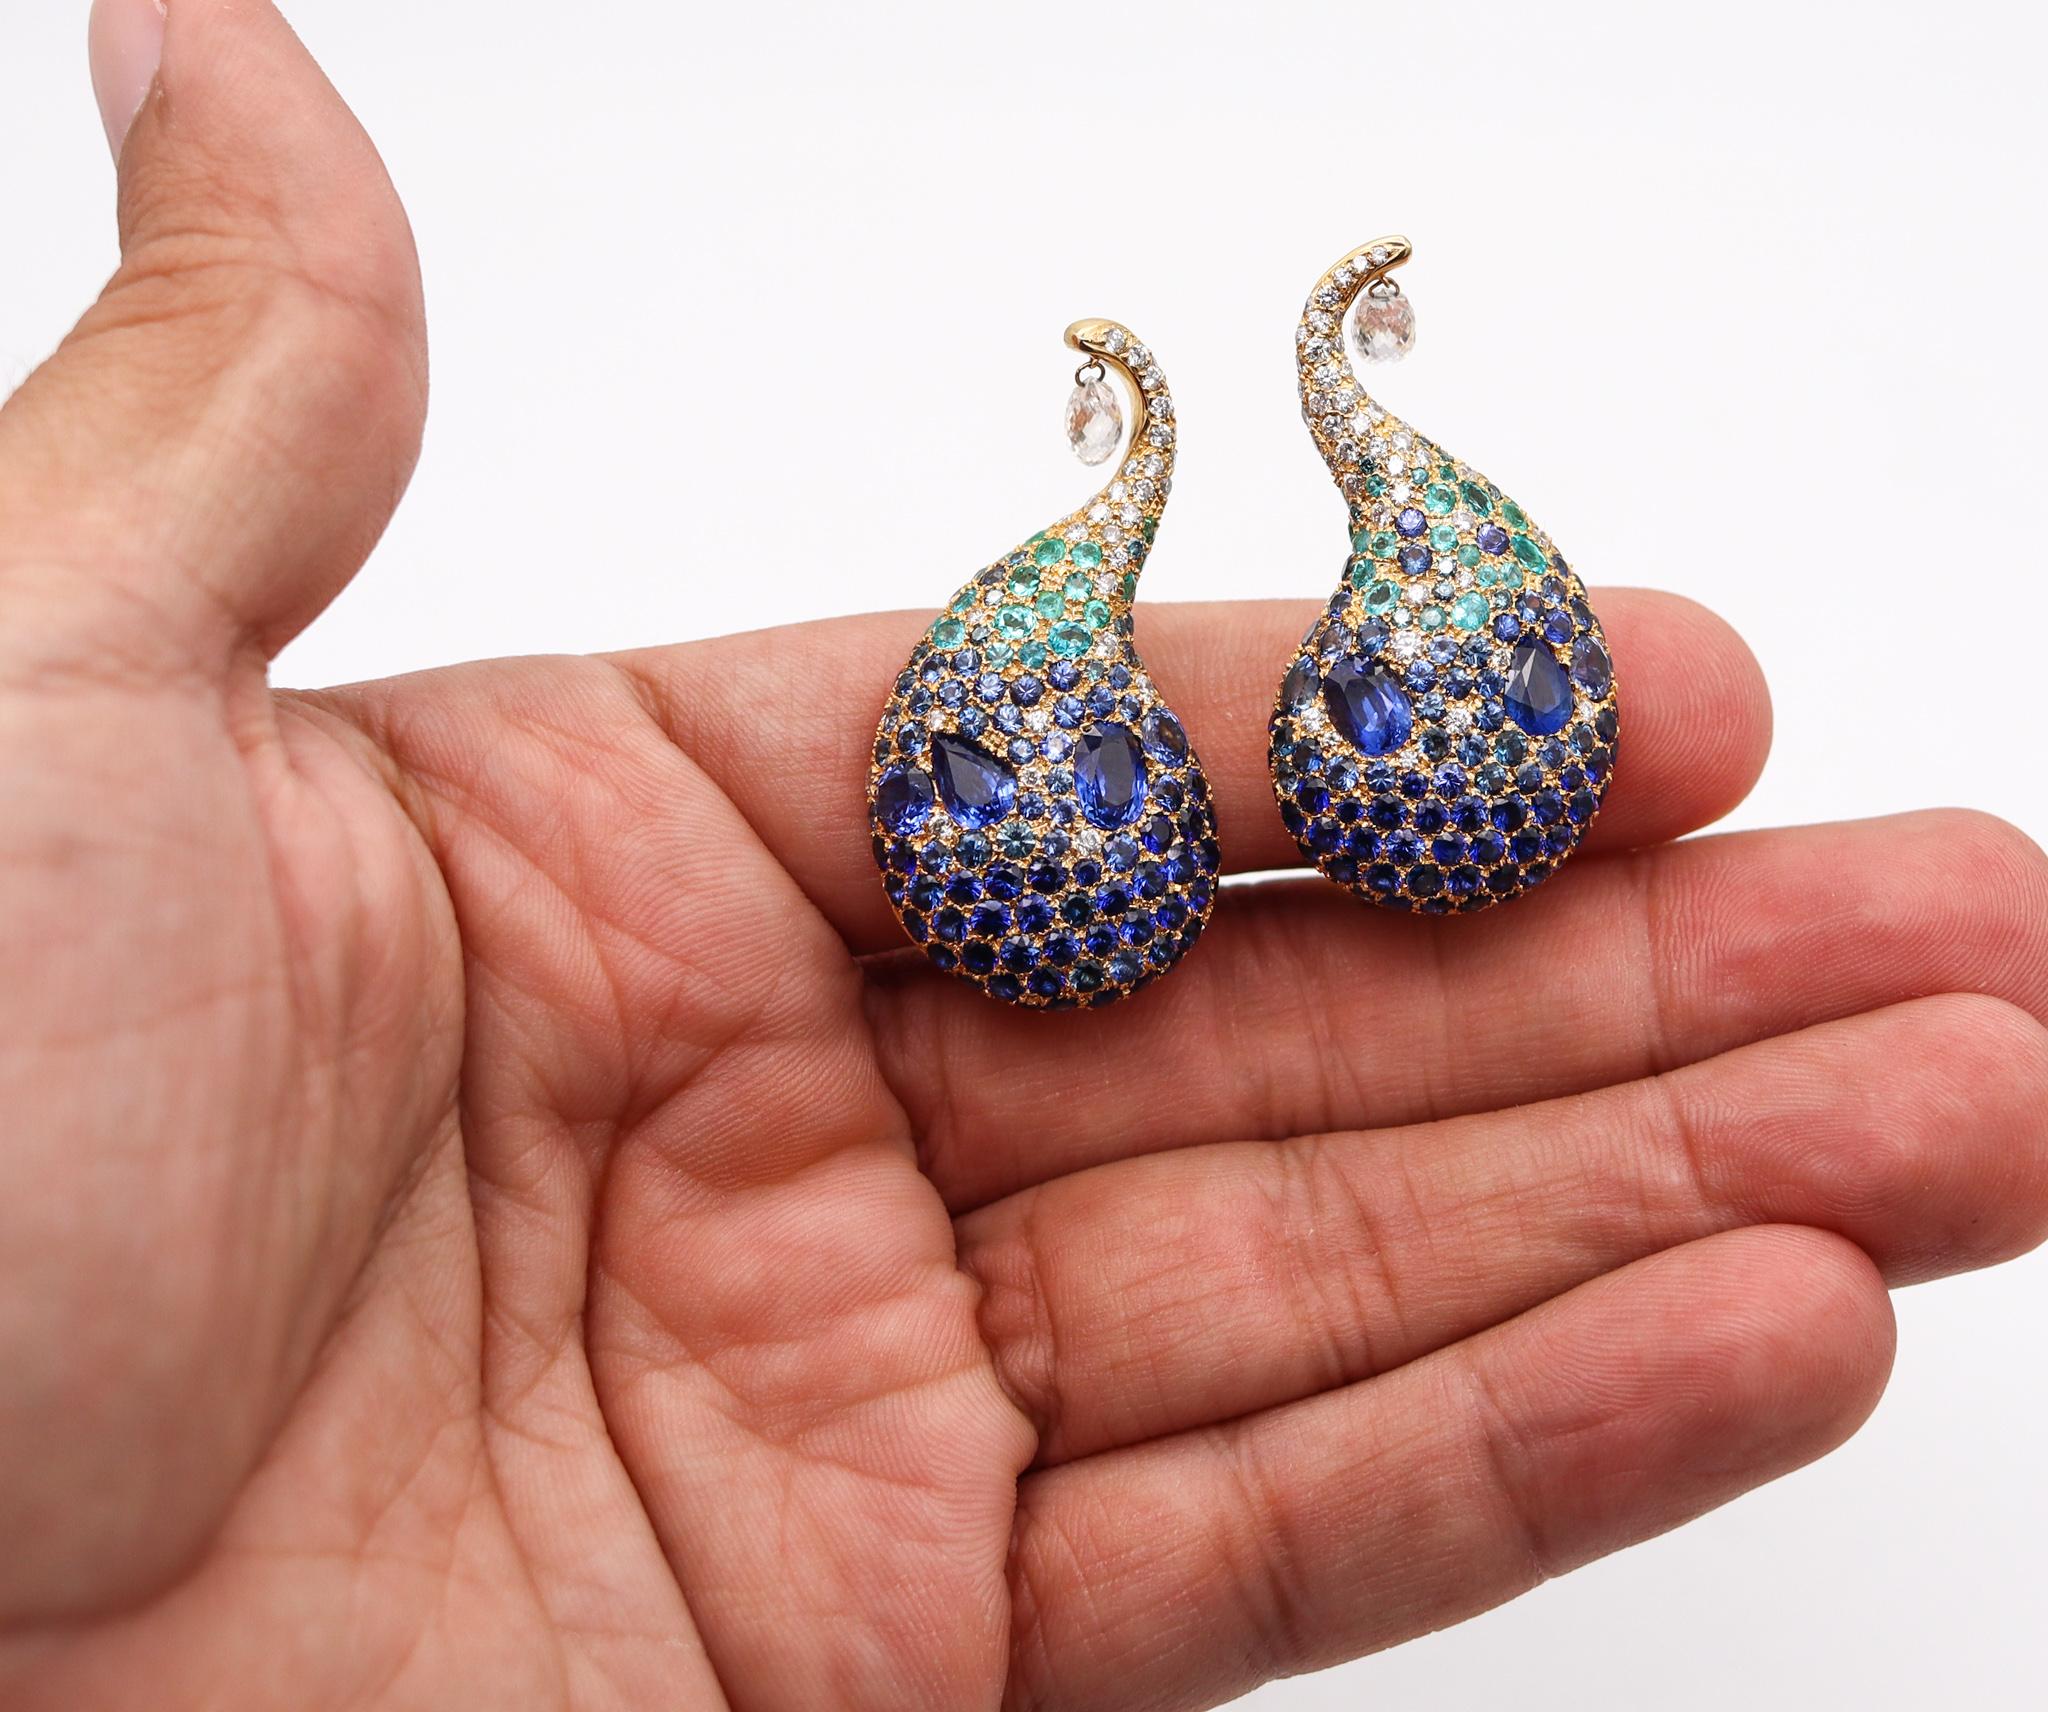 Free form earrings designed by Michelle Dalla Valle.

Exceptional pair of colorful clips-on earrings, created in Roma Italy by the jewelry designer Michele Della Valle. These flamboyant pieces has been crafted with a free form curve shape in solid